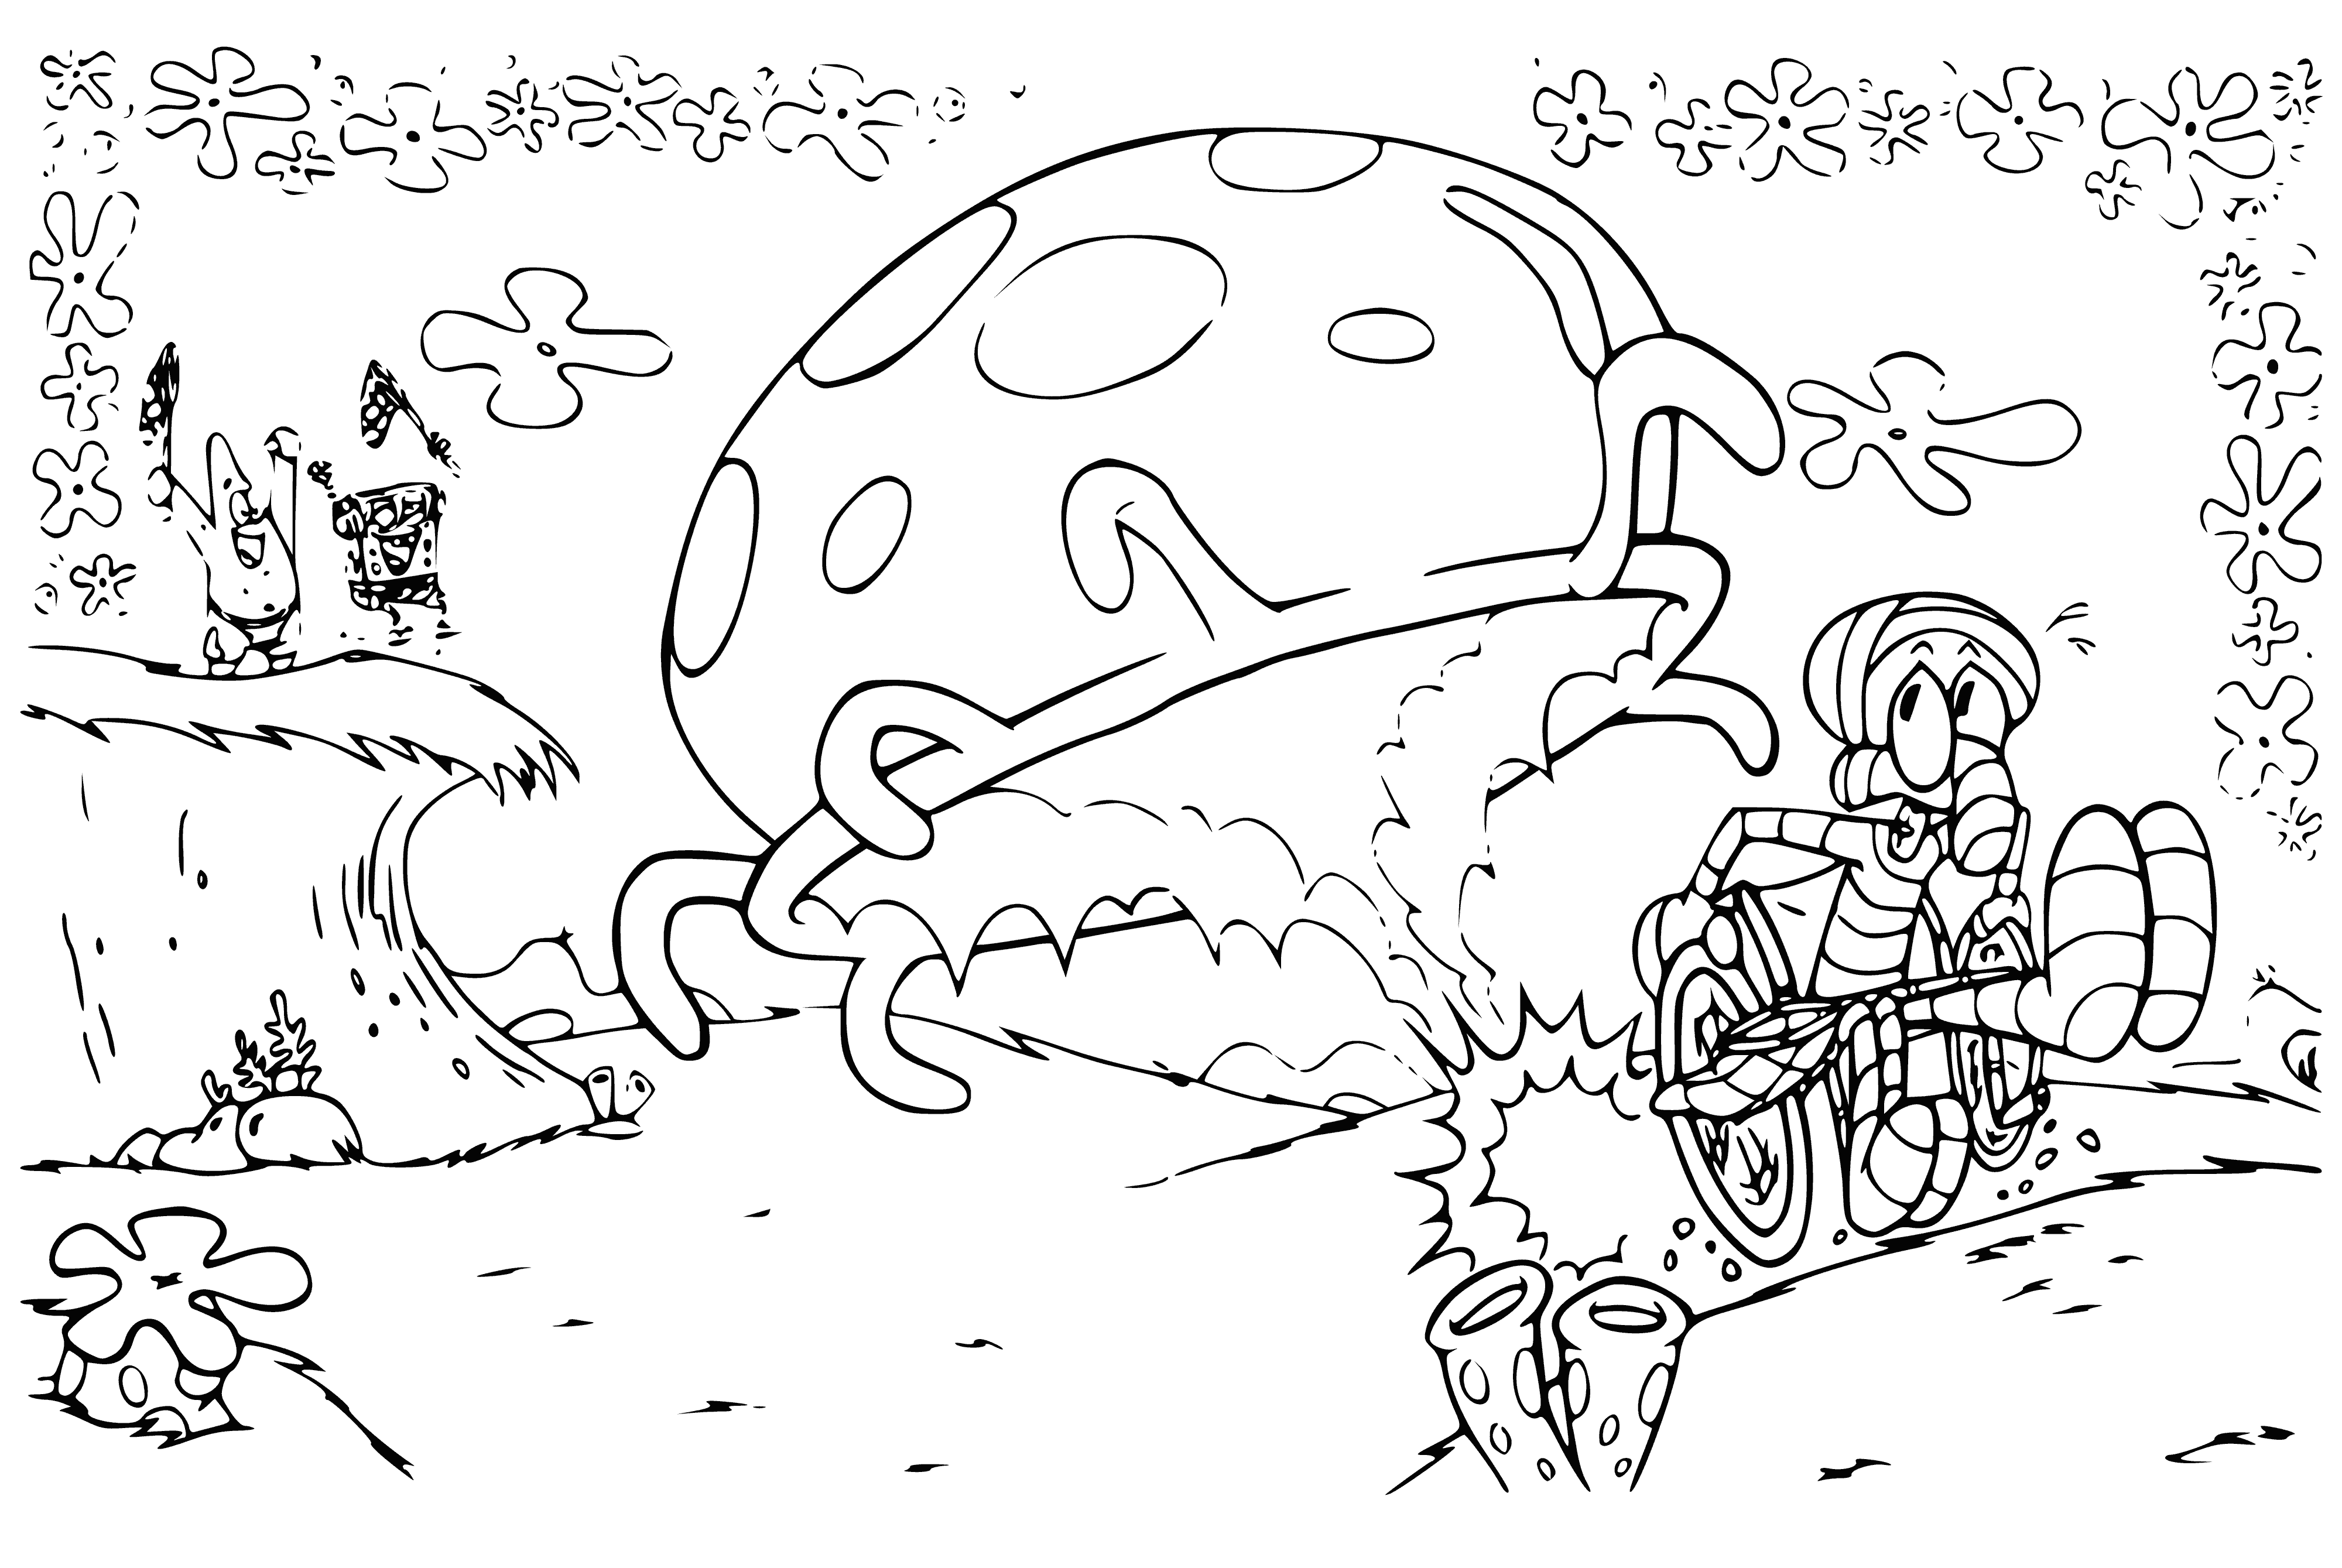 Giant jellyfish coloring page